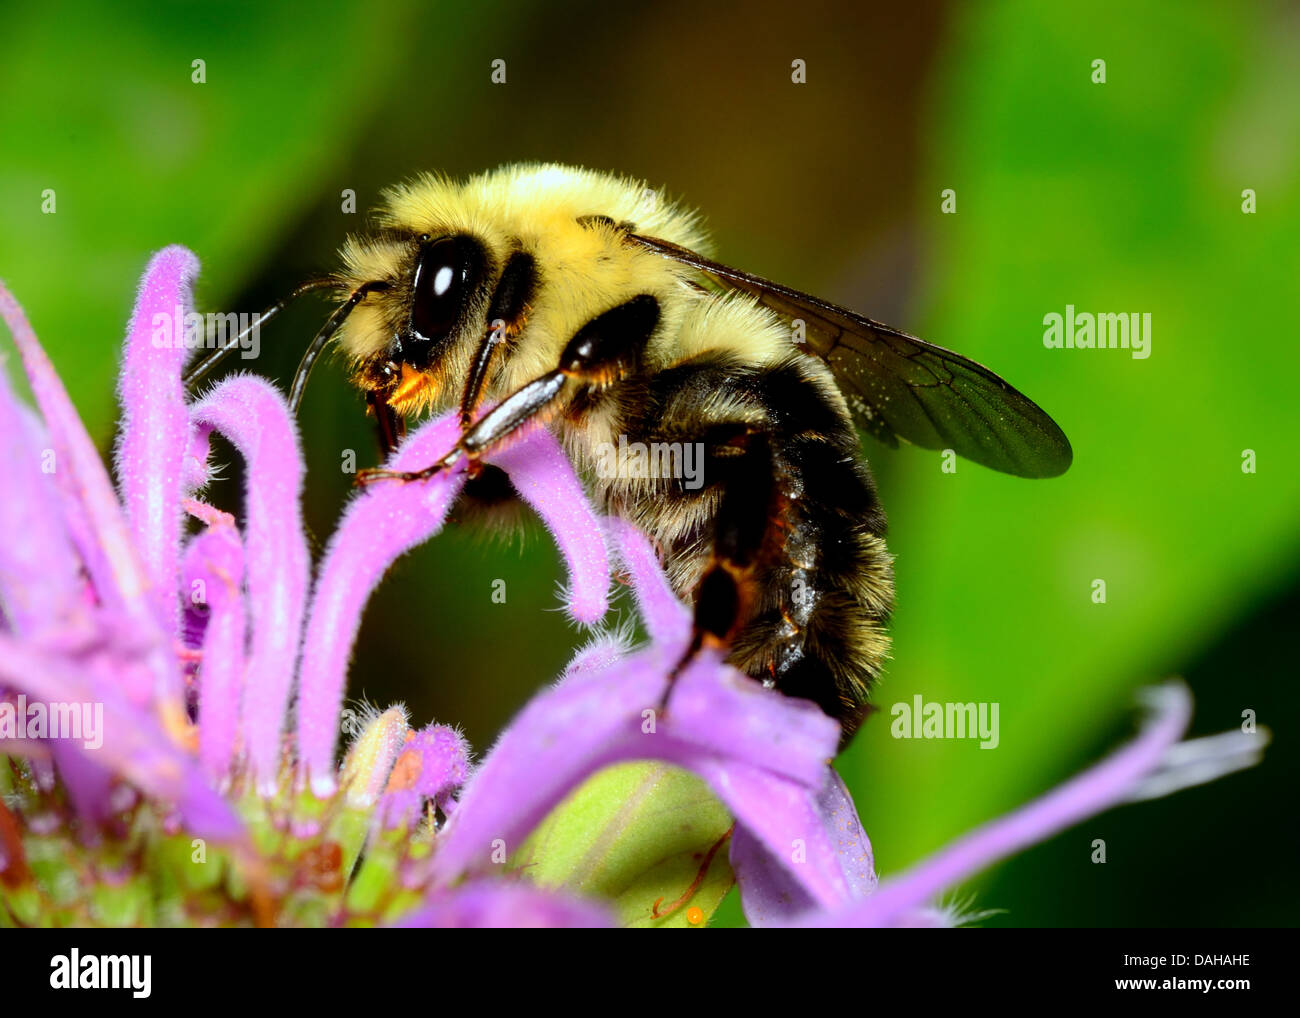 Bumble Bee perched on a flower collecting pollen. Stock Photo